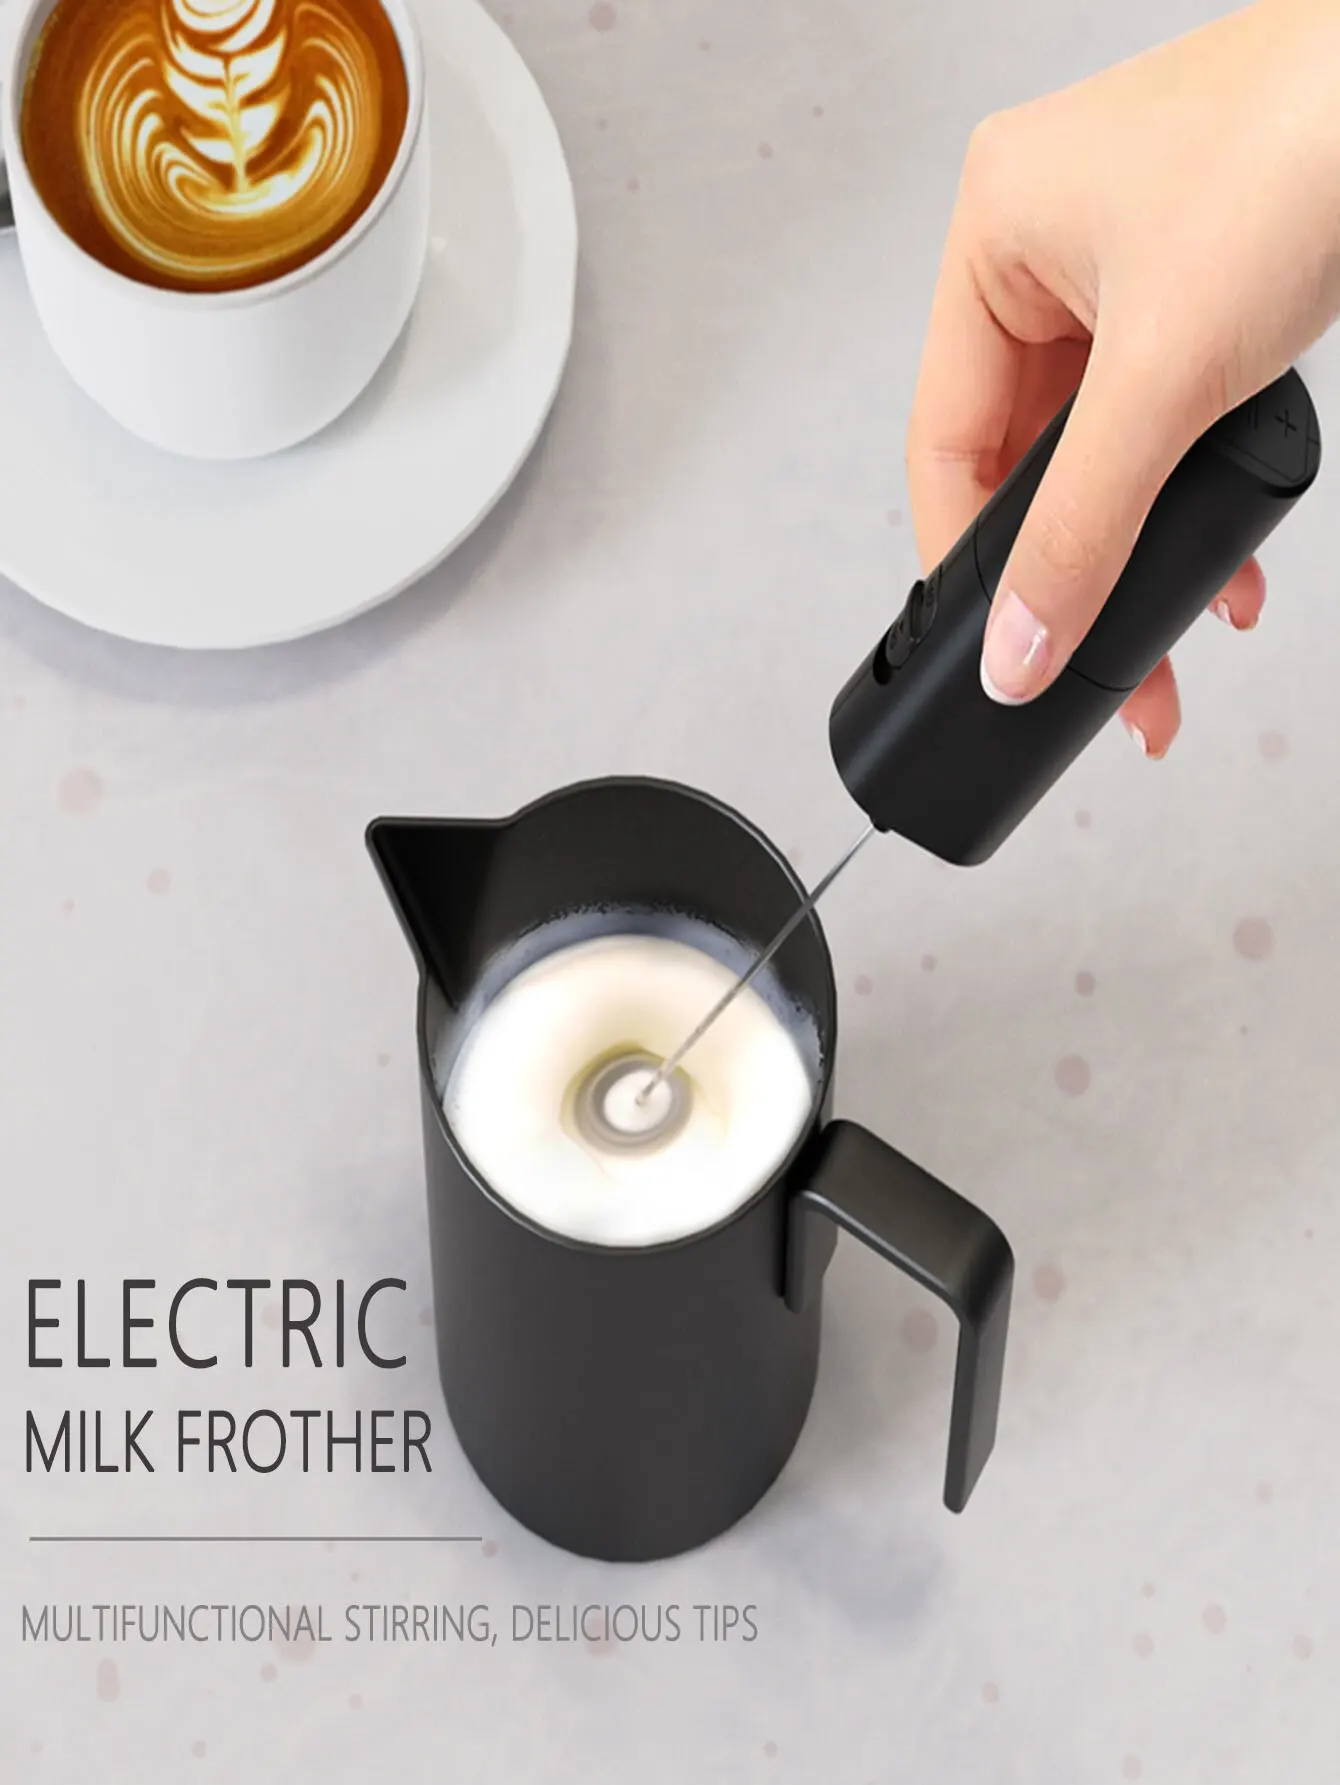 https://ae01.alicdn.com/kf/S8ed206ec888644a89d5f82e953d3d35aU/Electric-Milk-Frother-Foam-Maker-Mixer-Coffee-Drink-Frothing-Wand-Battery-Operated-Portable-Handheld-Foamer-High.jpg